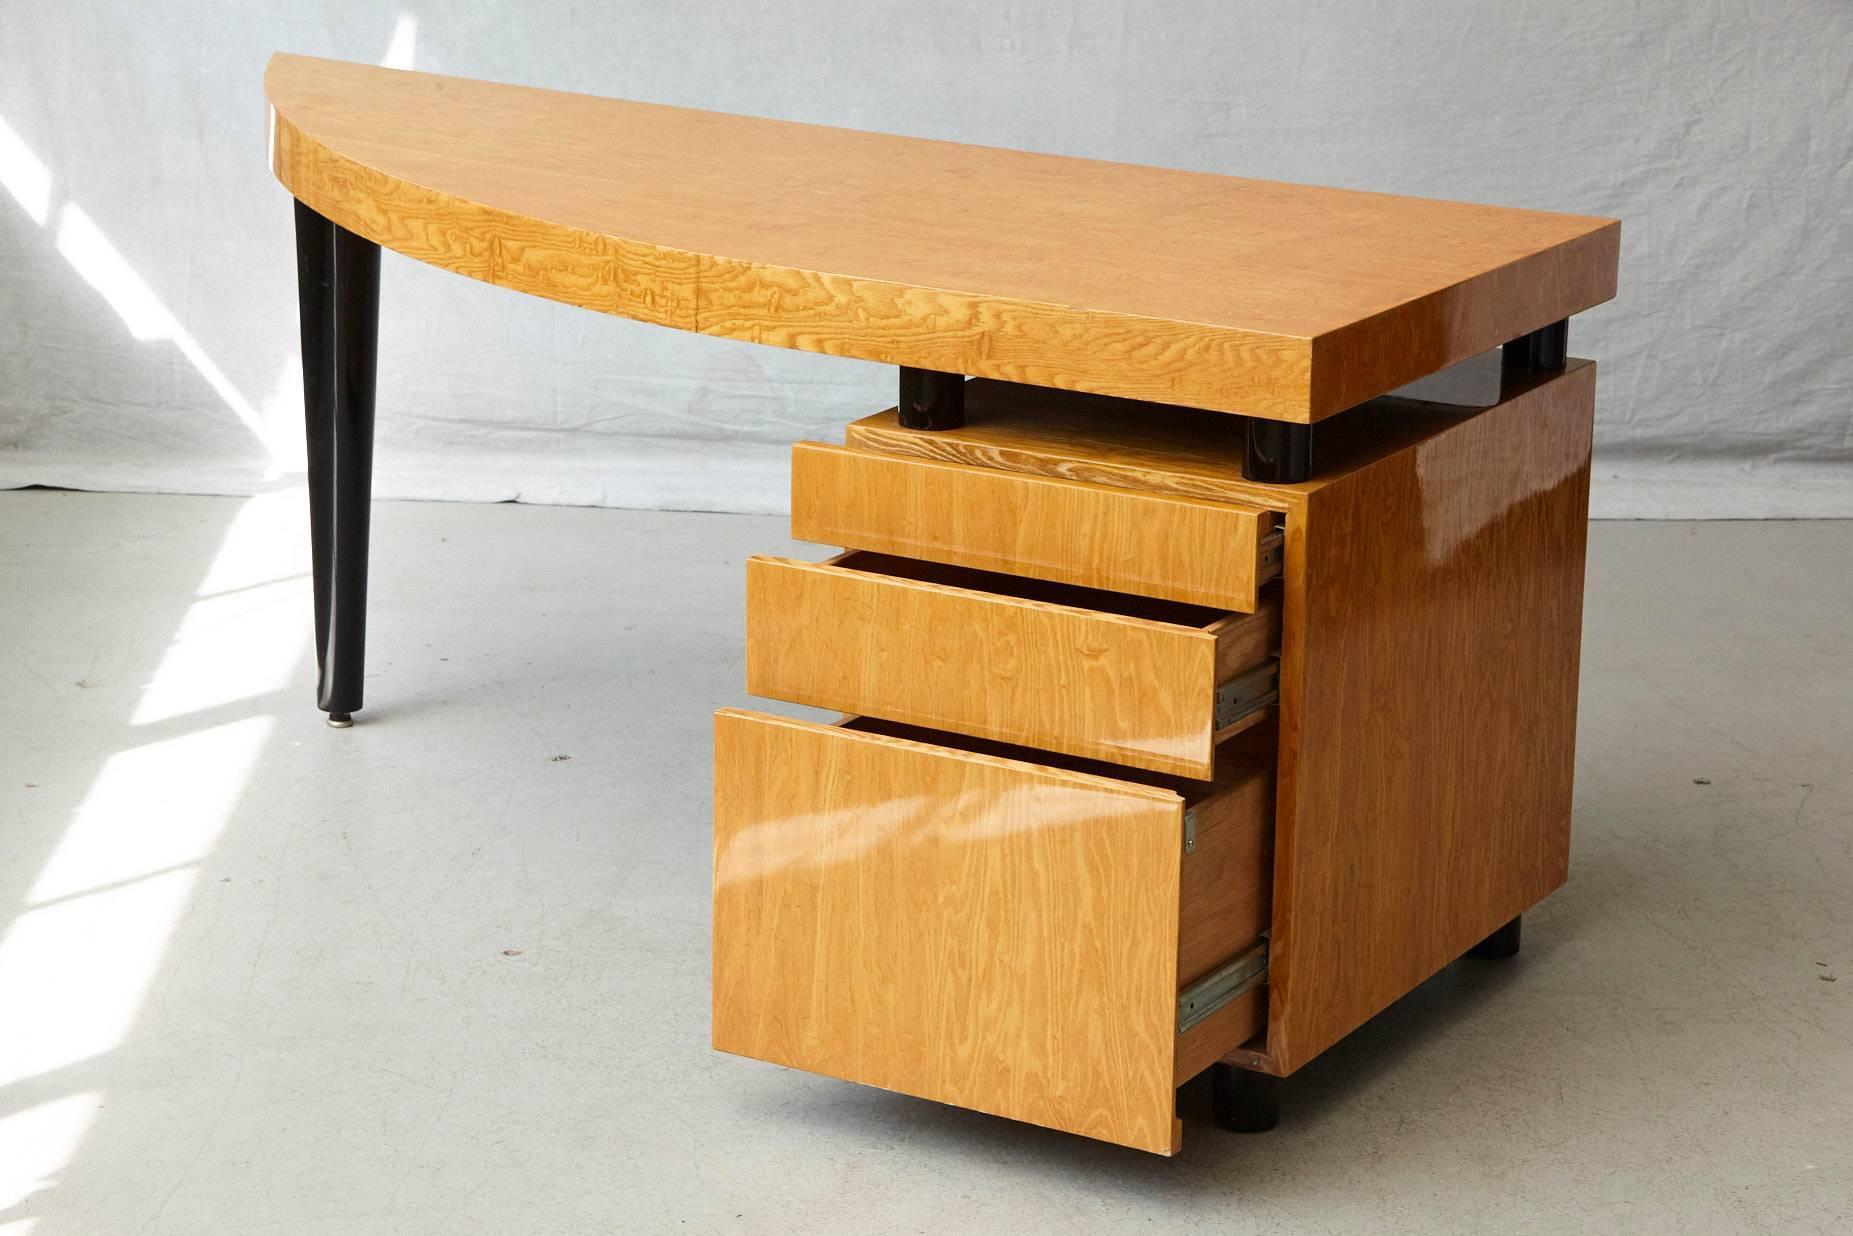 Triangular Memphis Style Inspired Lacquered 'Boca Desk' by Leon Rosen for Pace For Sale 2